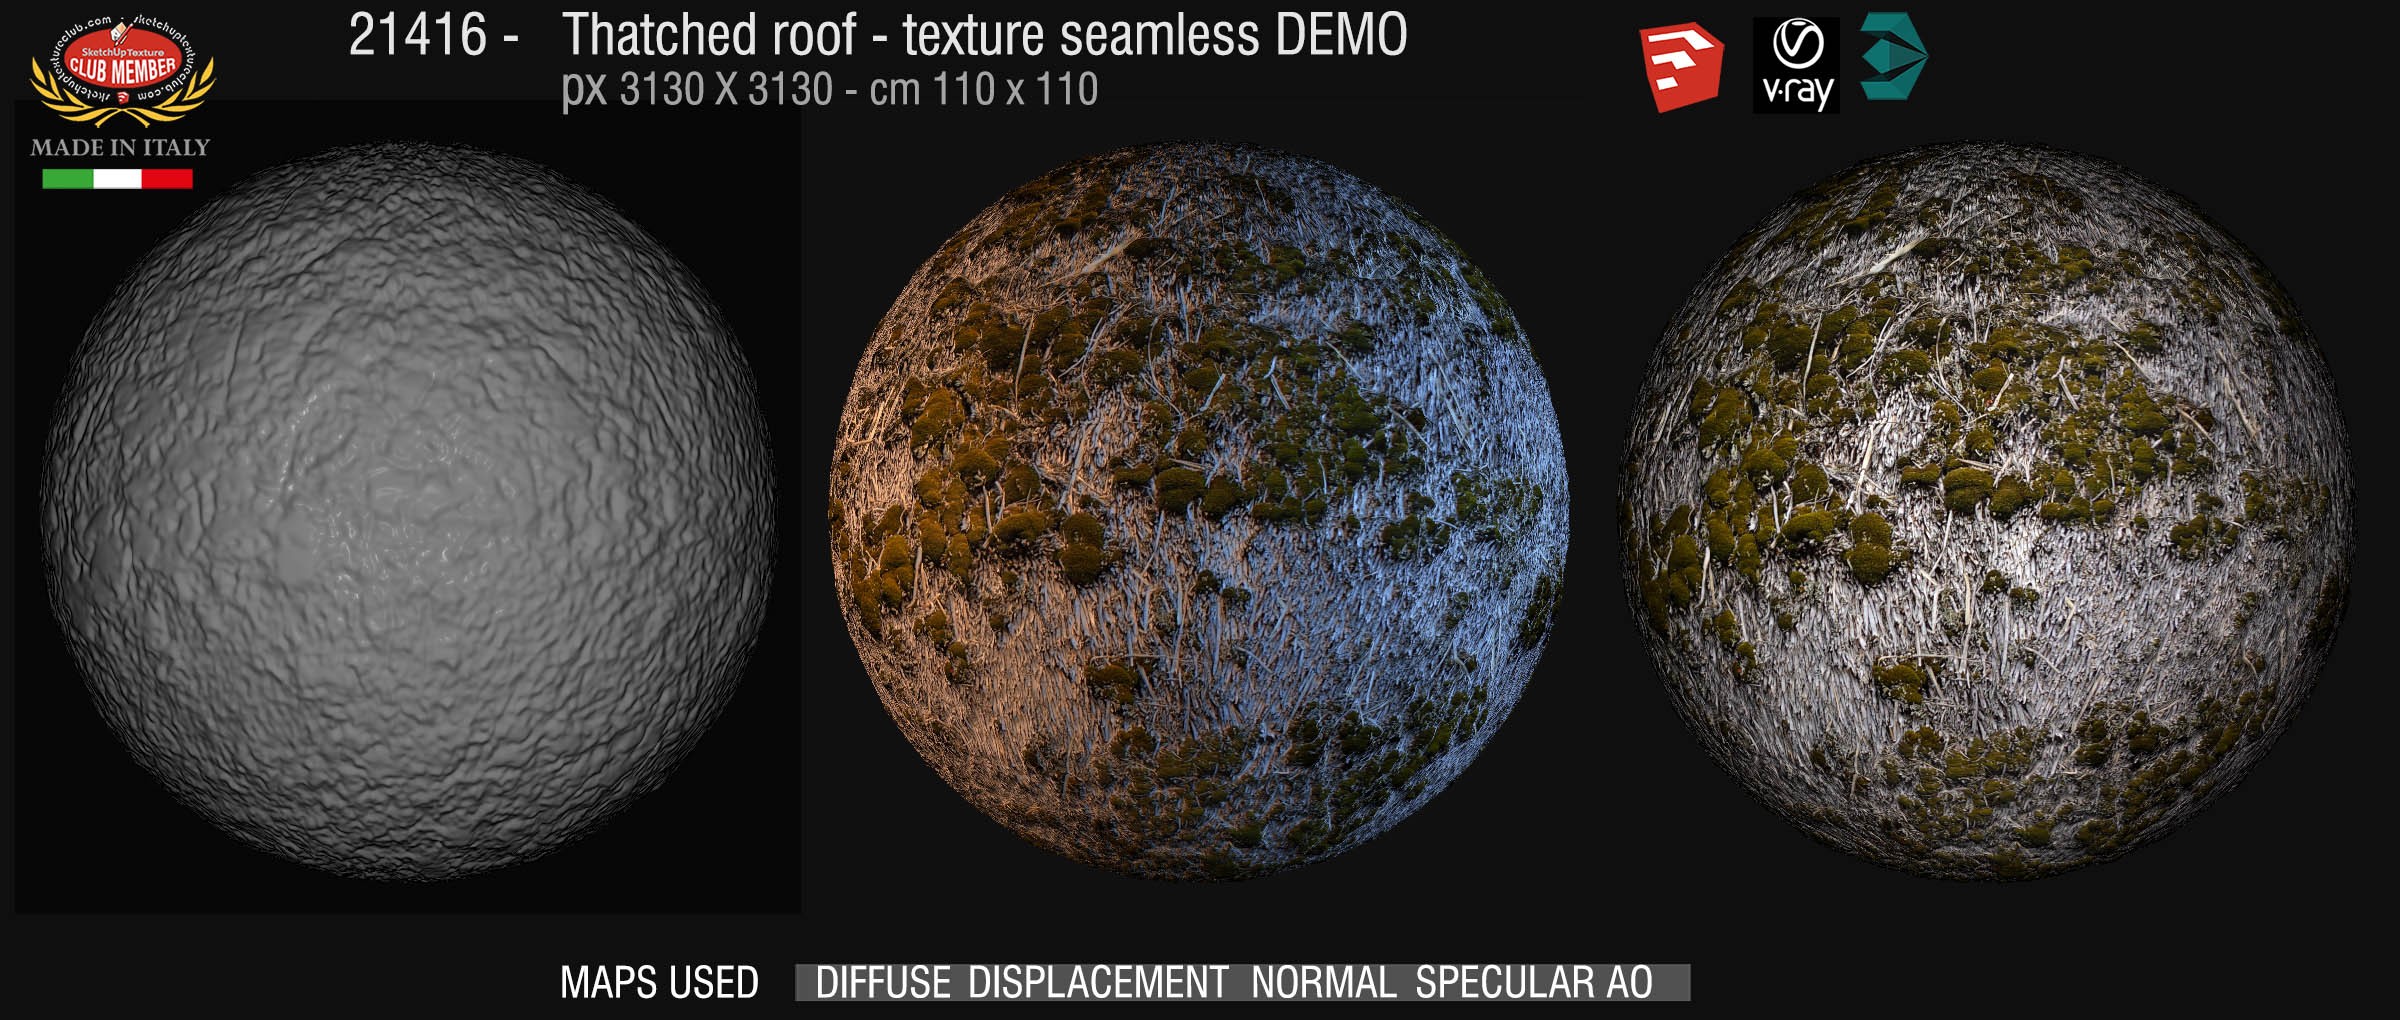 21416 thatched roof texture seamless + maps DEMO